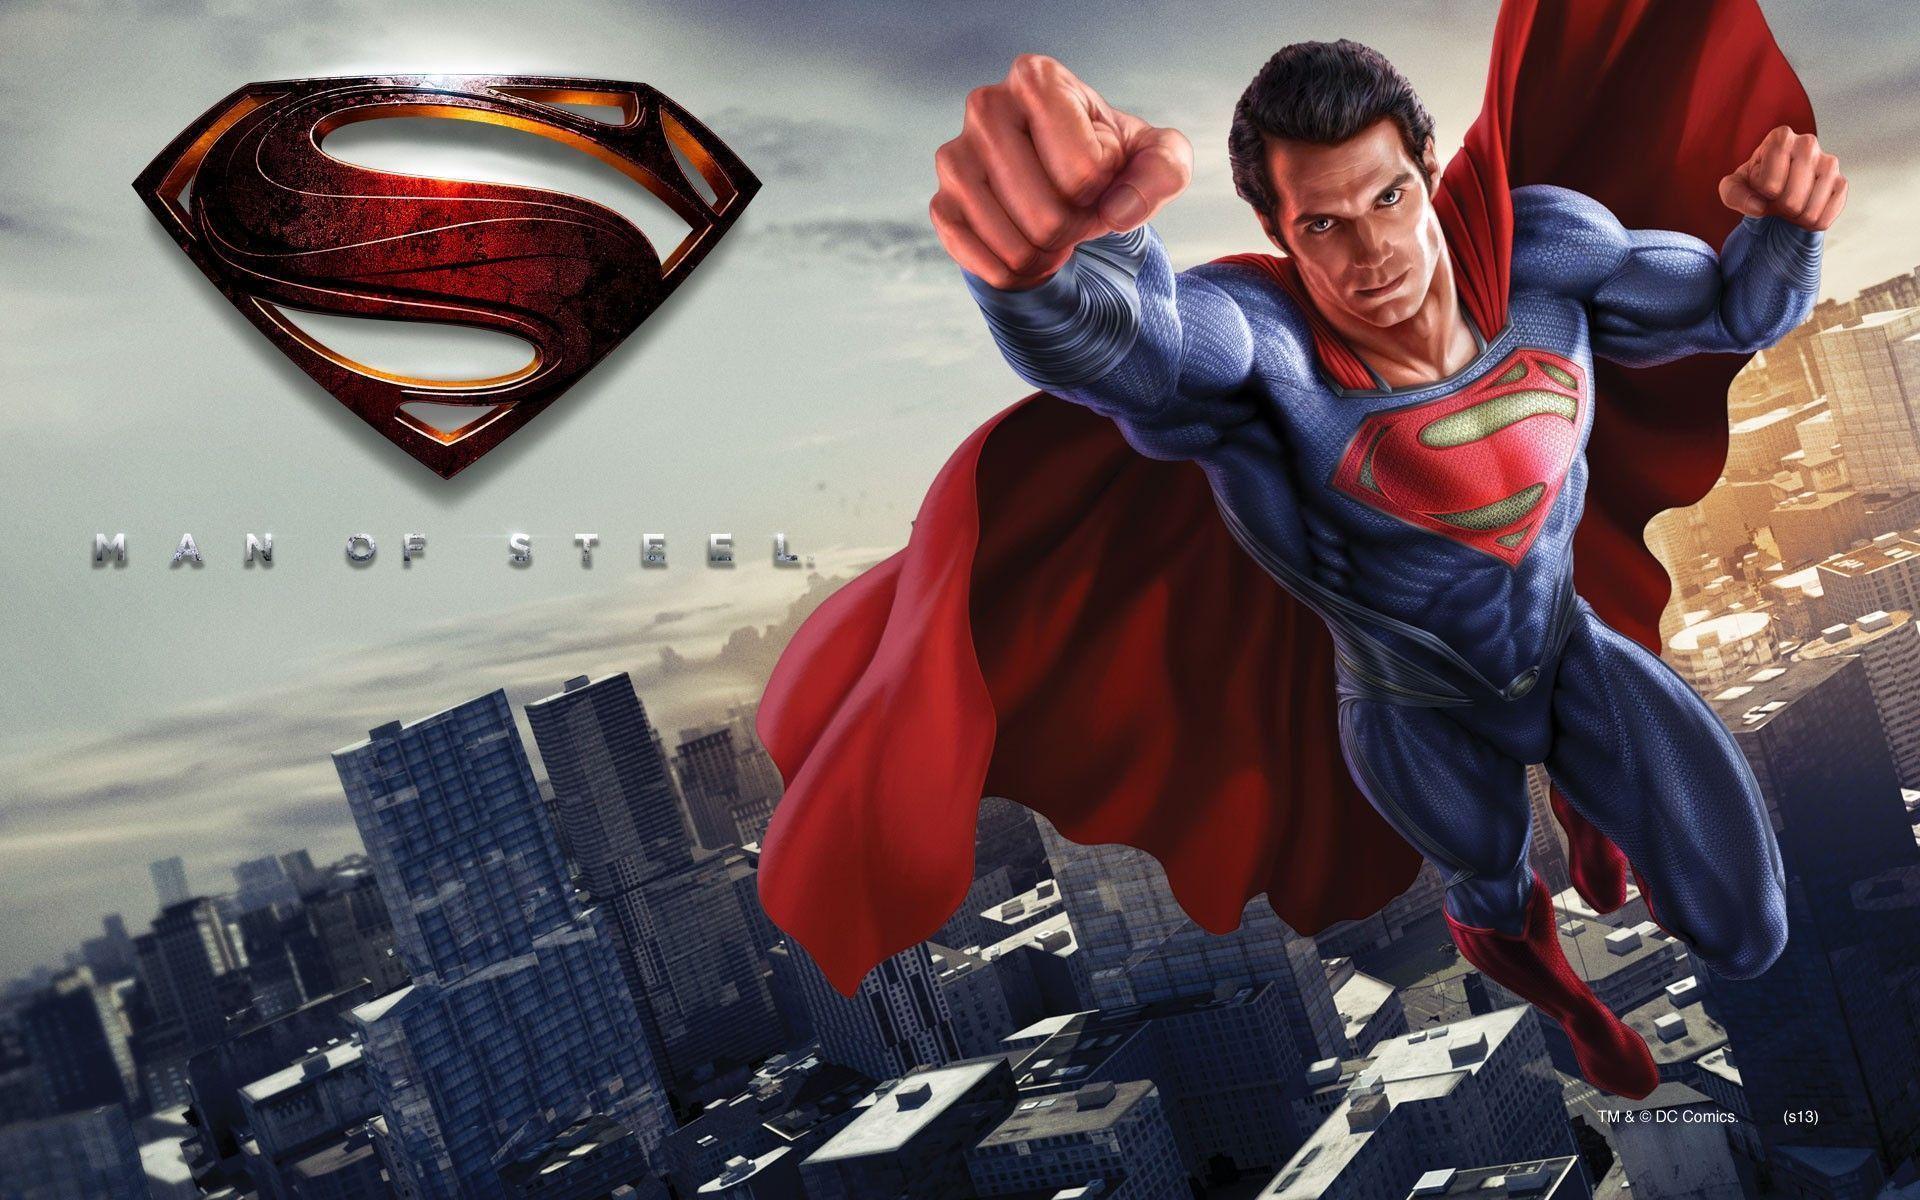 Superman The Movie Images Wallpapers